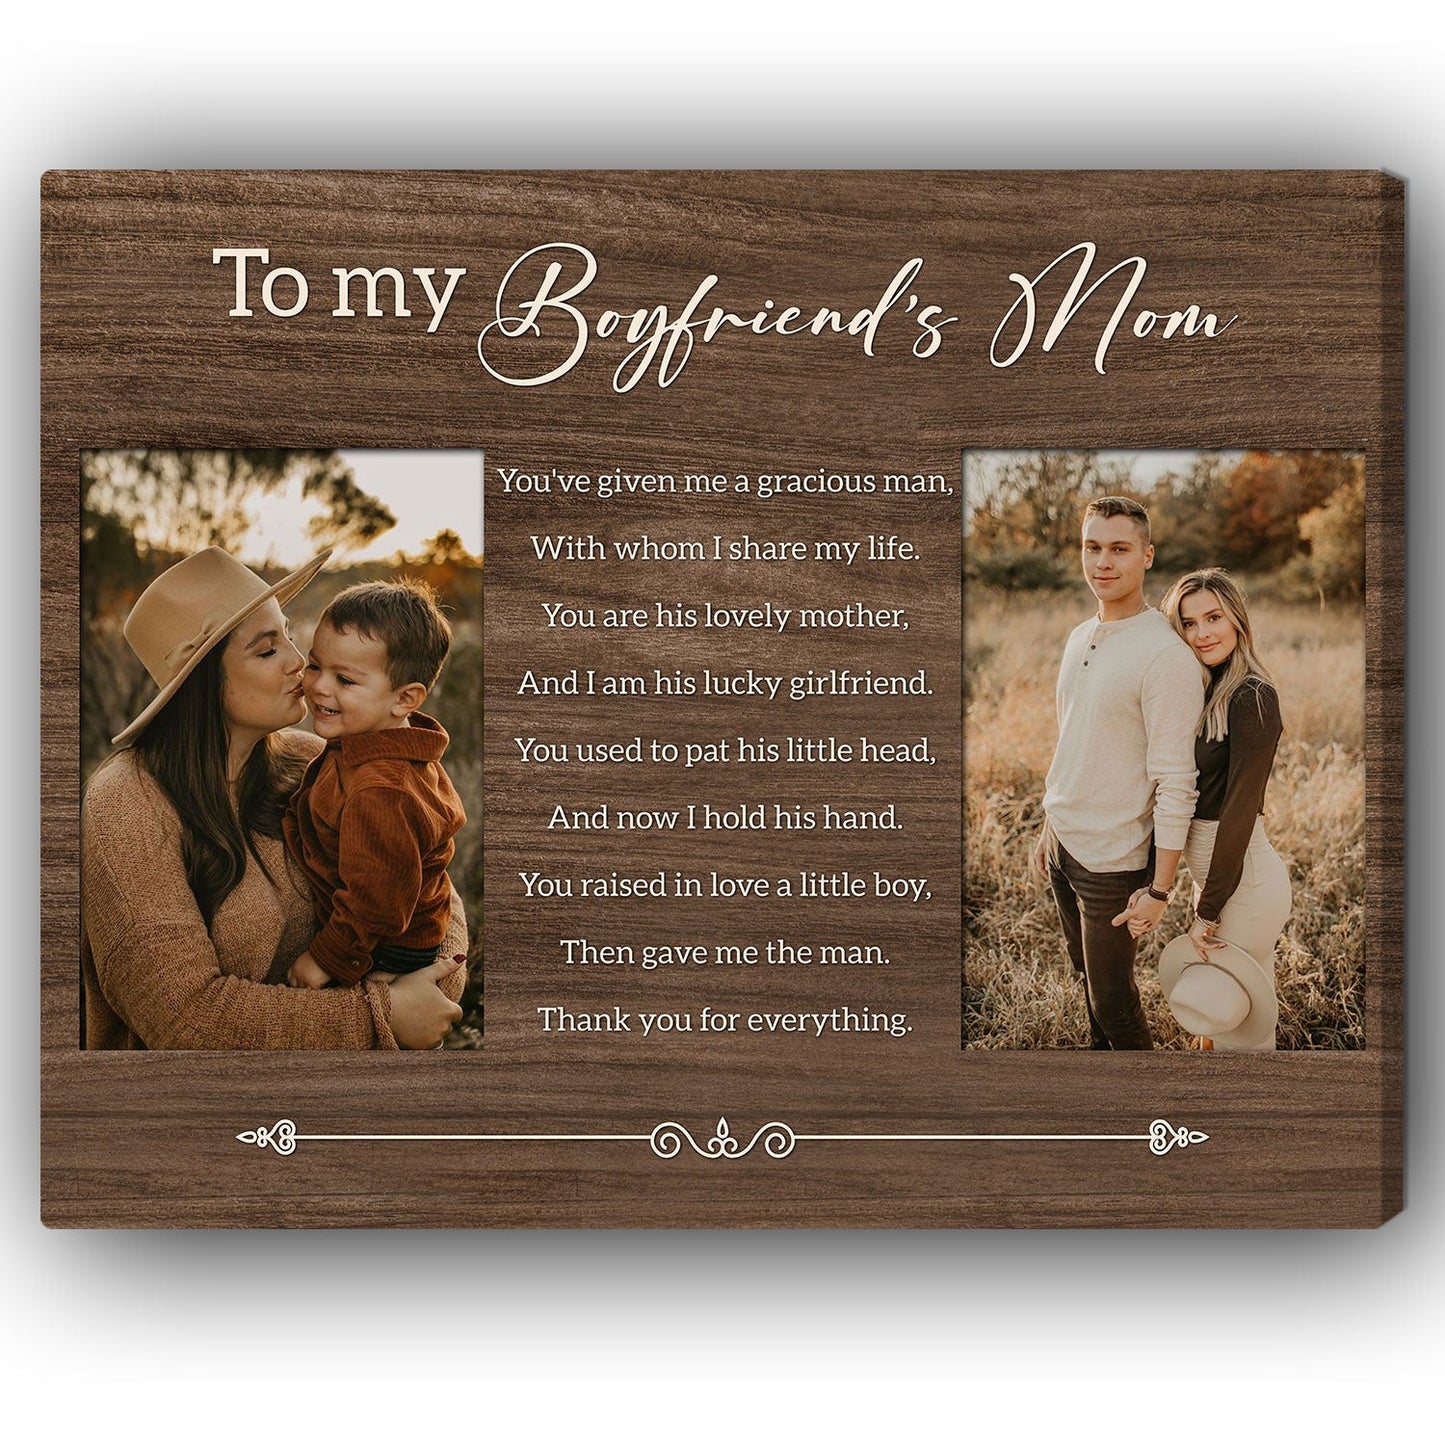 Personalized Gifts for Boyfriend s Mom Canvas Prints To My Boyfriend s Mom  - Best Seller Shirts Design In Usa